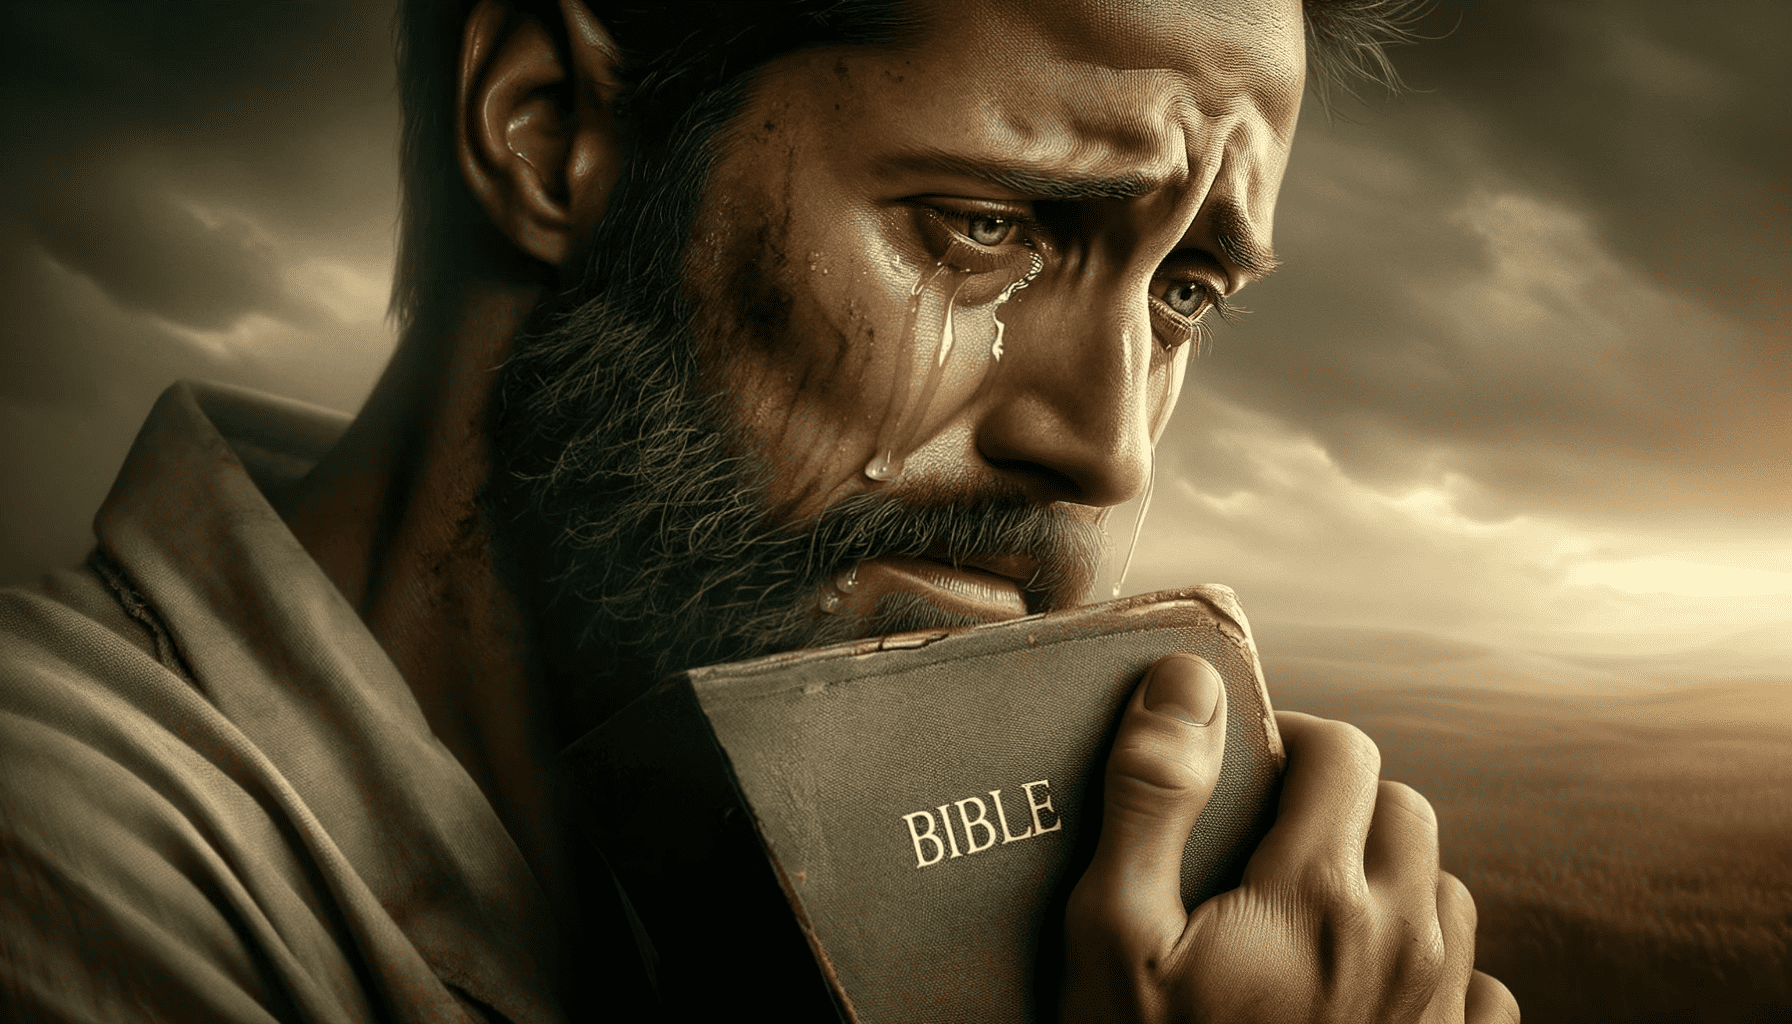 A close-up image of a bearded man with tears rolling down his face, holding a Bible close to his cheek against a backdrop of stormy clouds.